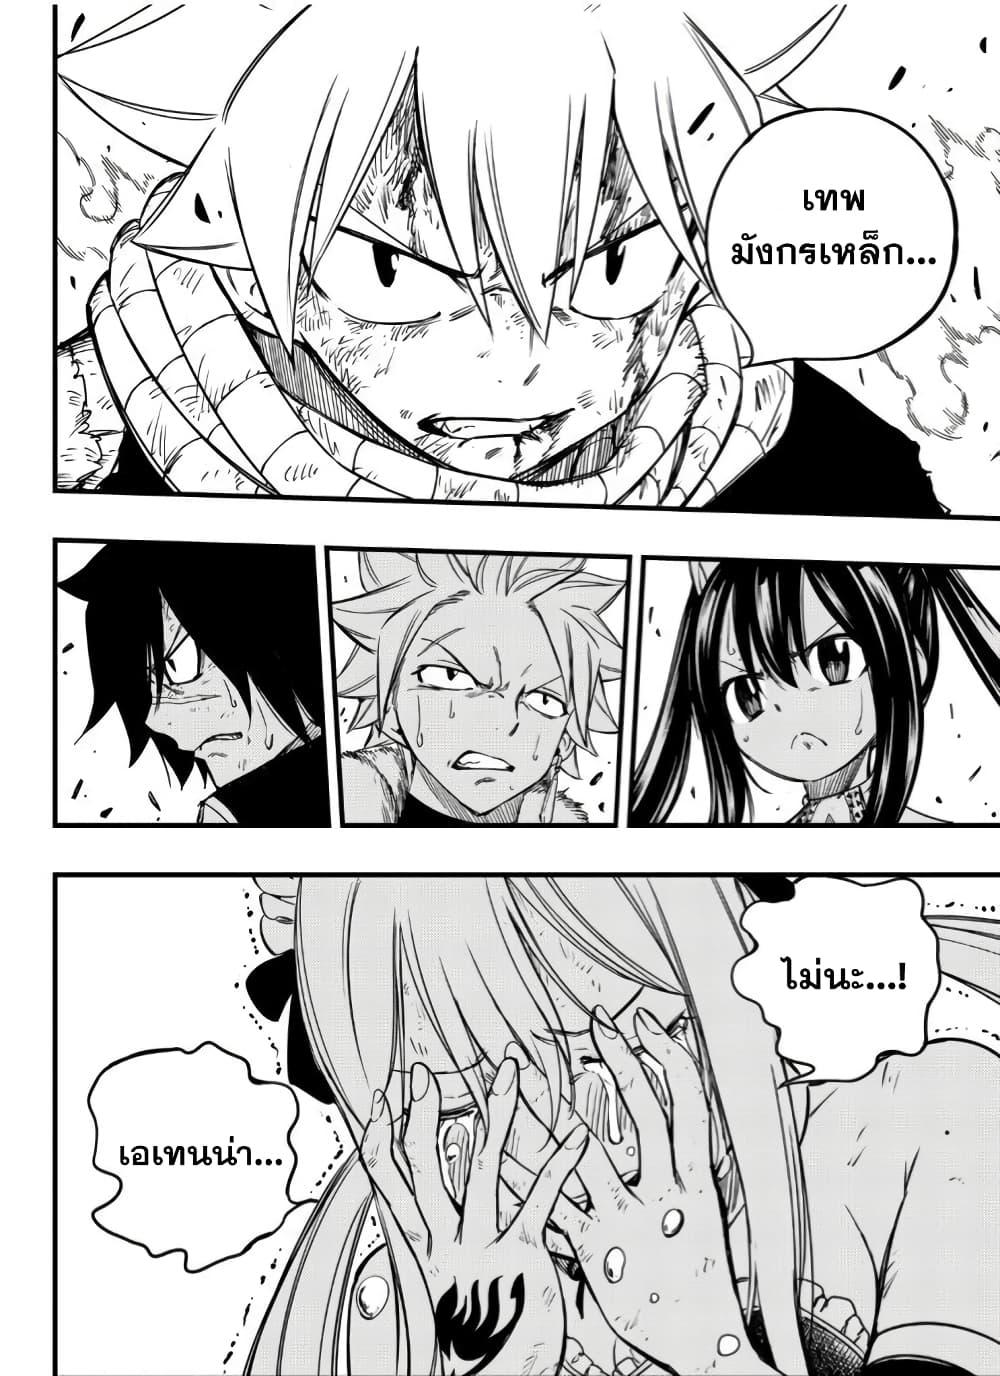 FairyTail 100 Years Quest 149